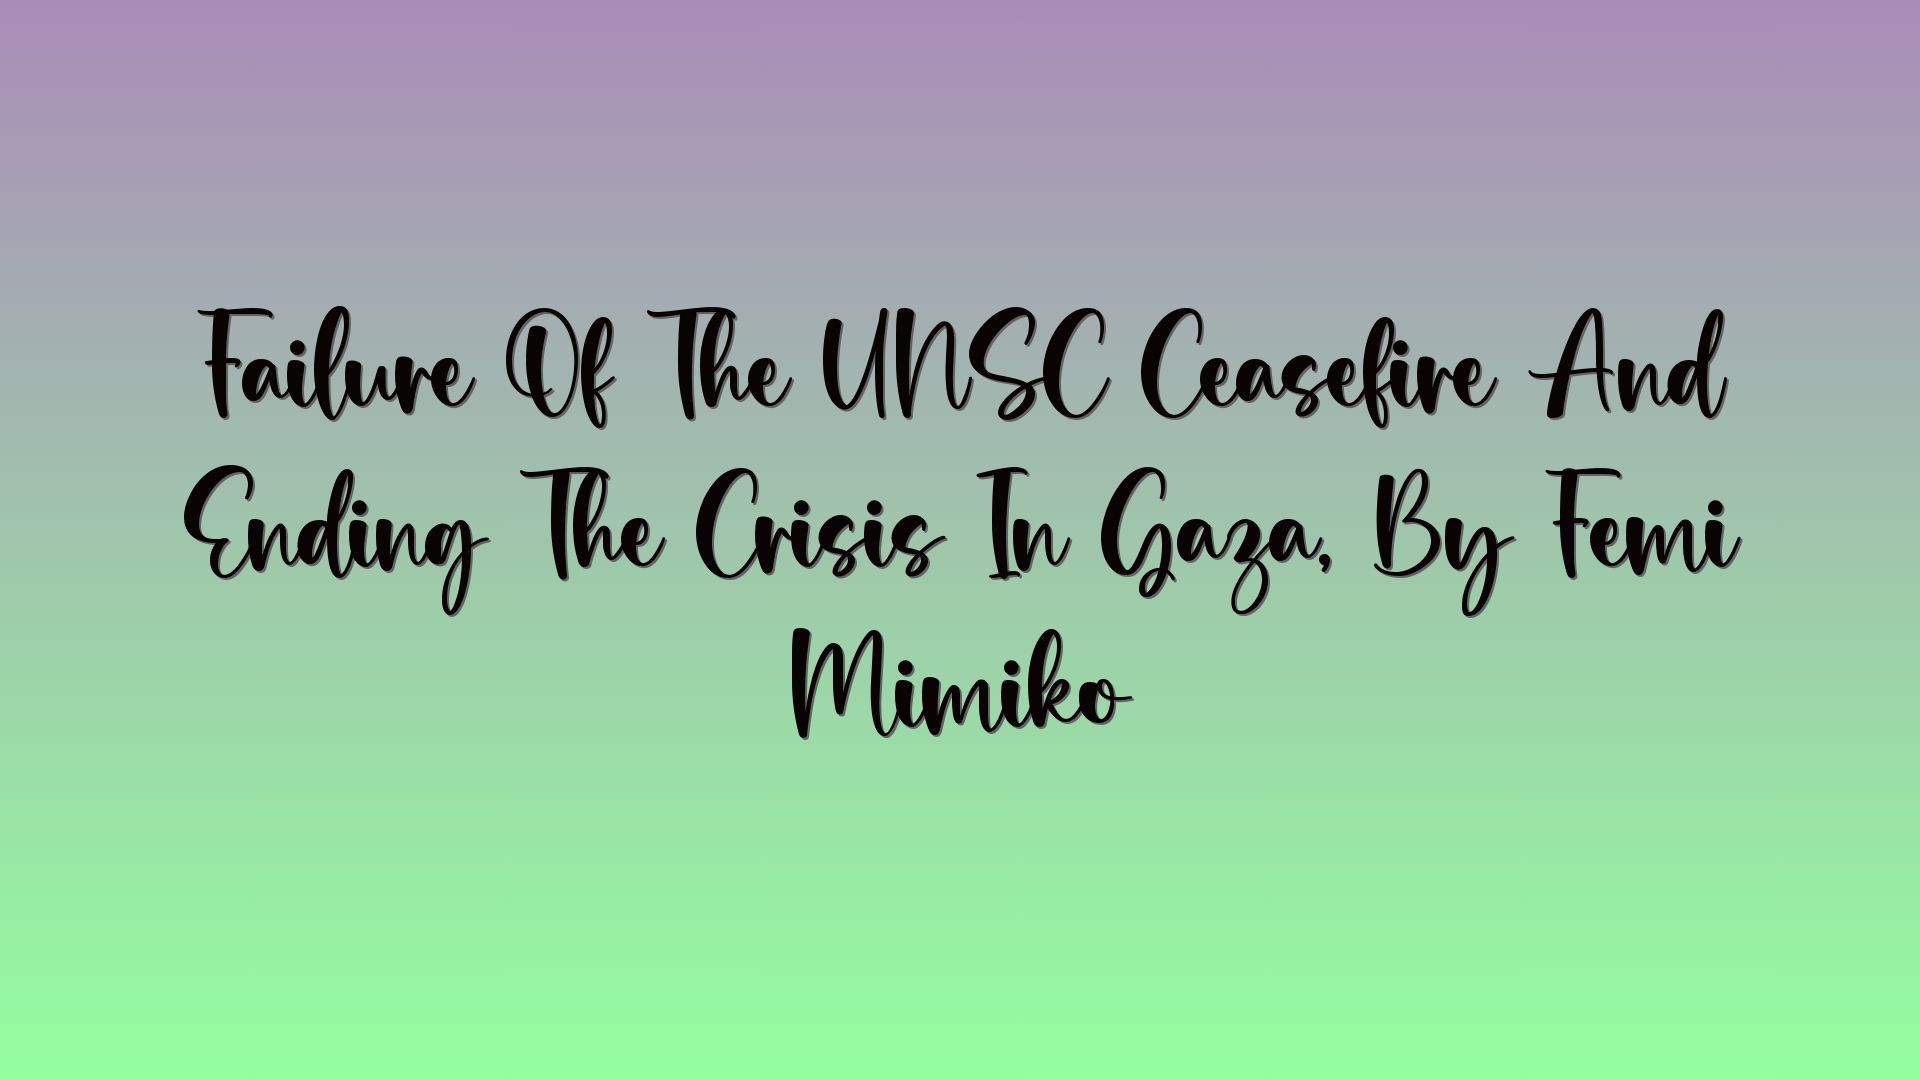 Failure Of The UNSC Ceasefire And Ending The Crisis In Gaza, By Femi Mimiko